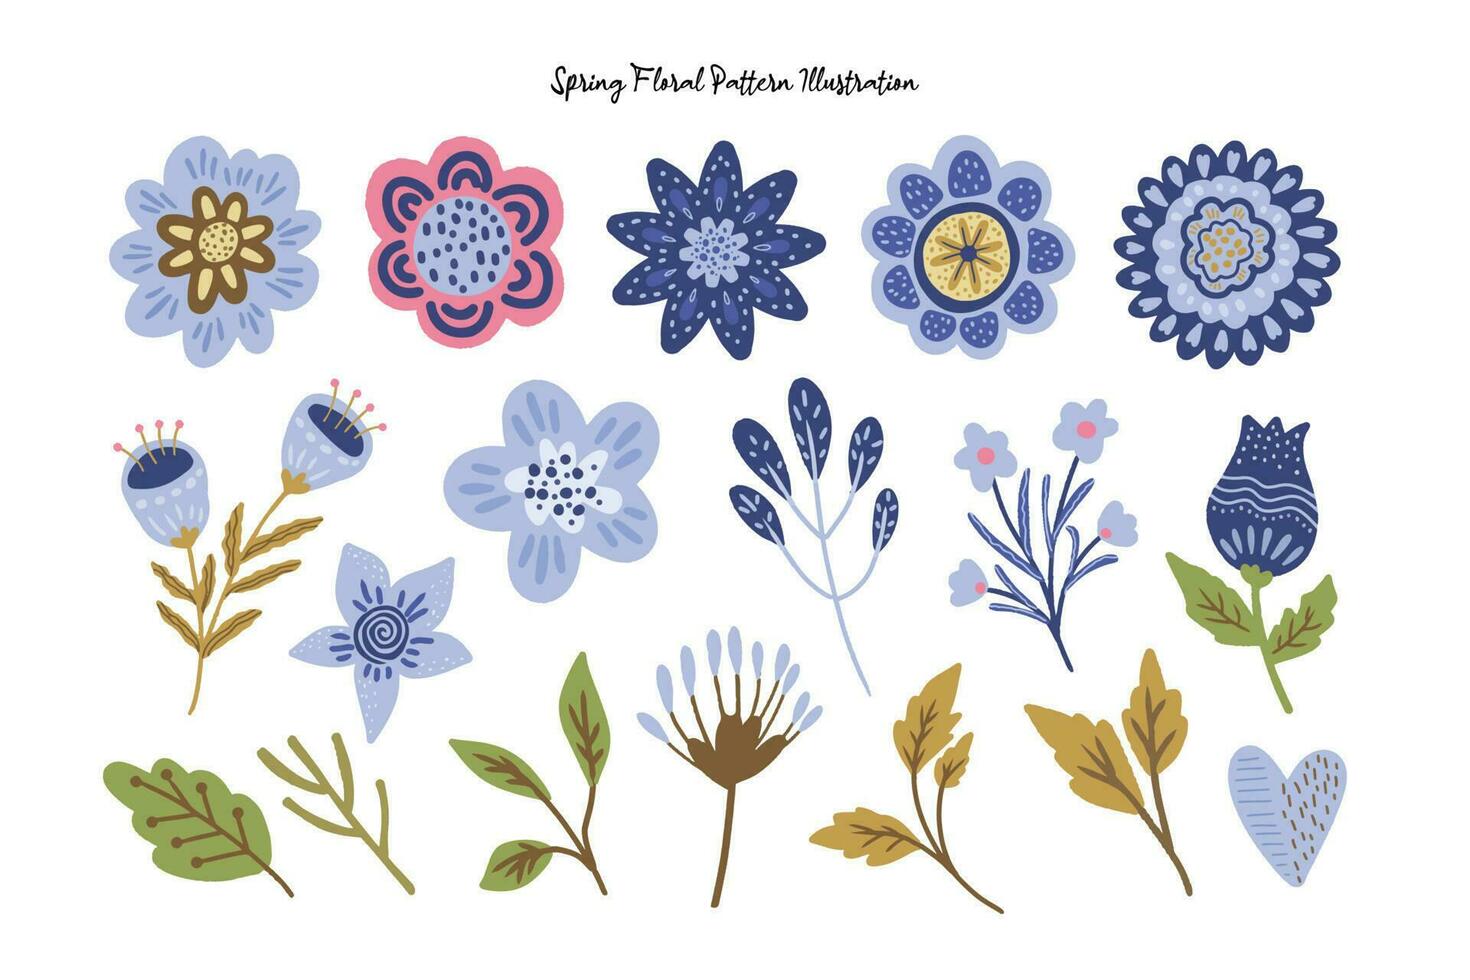 Cute Spring and Summer Flower Flat Design Collection vector